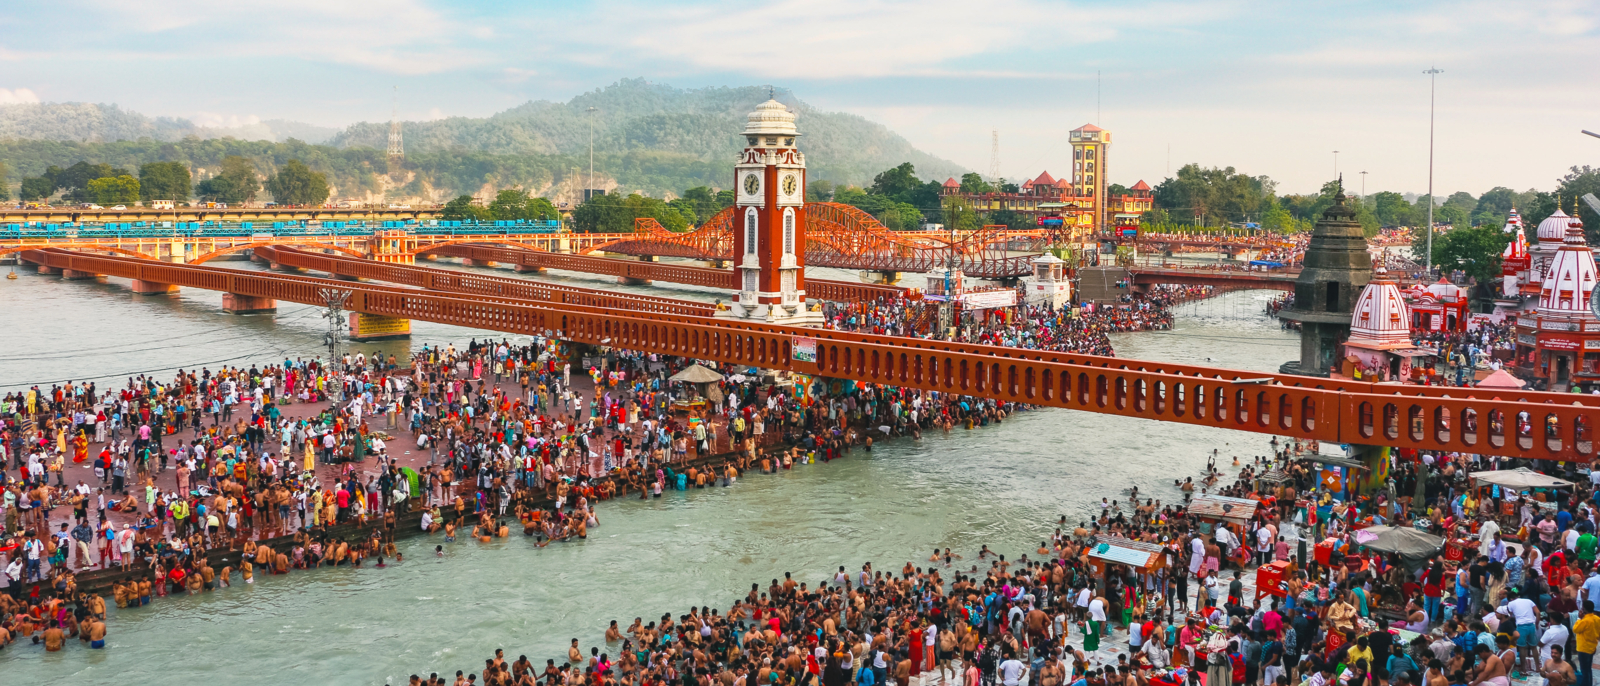 Har Ki Pauri is a famous ghat on the banks of the Ganges in Haridwar, India